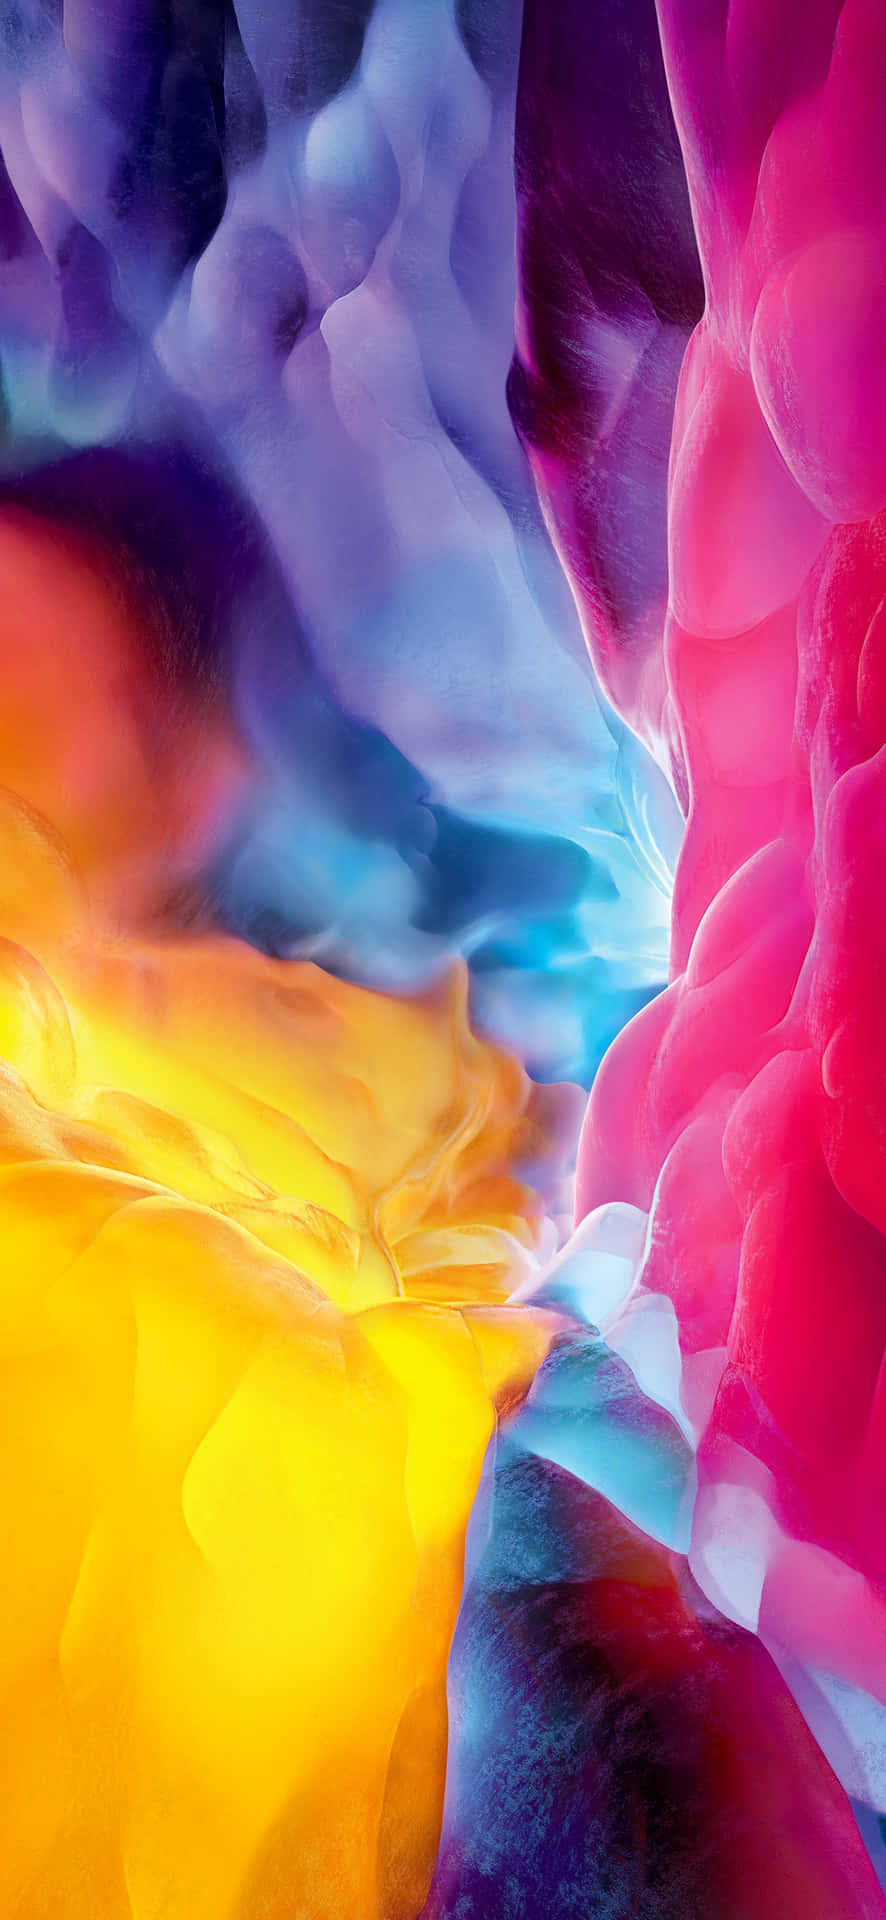 The ultimate device for creativity: the Apple iPad 2 Wallpaper